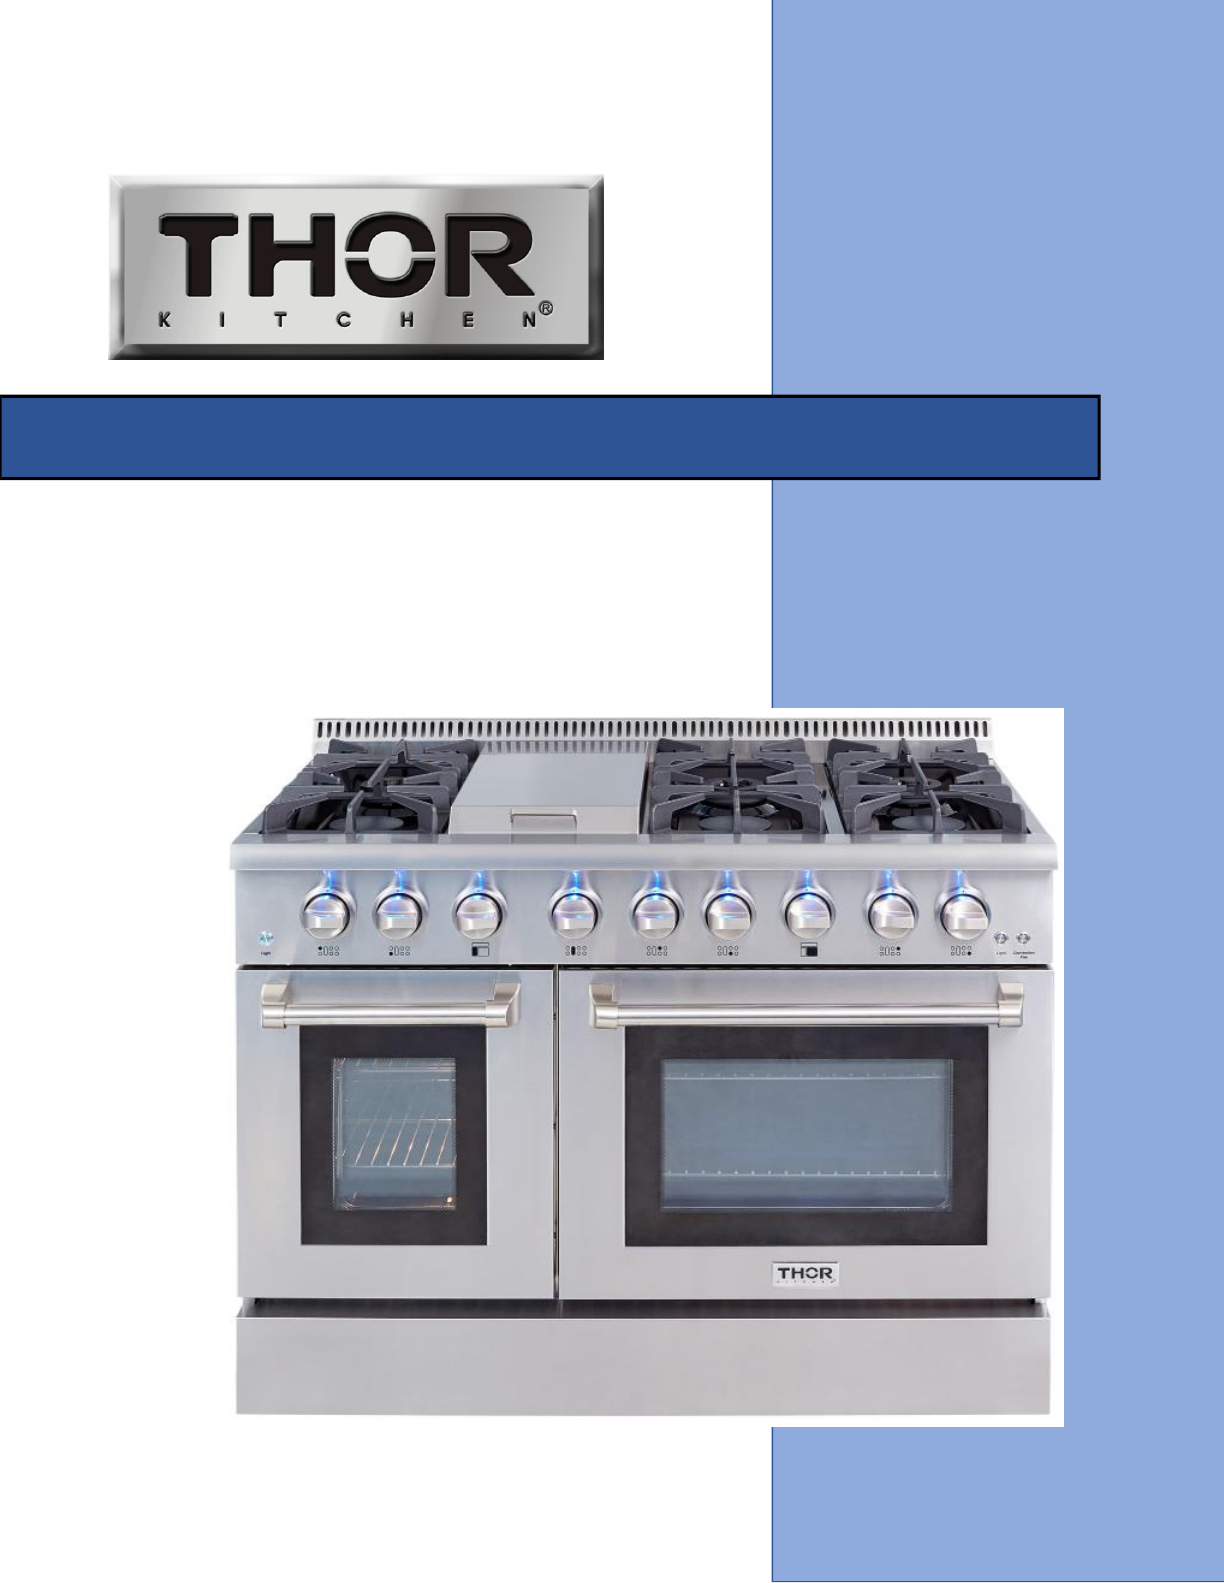 Thor Pre-Converted Propane 30 in. cu. ft. Dual Fuel Range Stainless Steel : and Care Guide